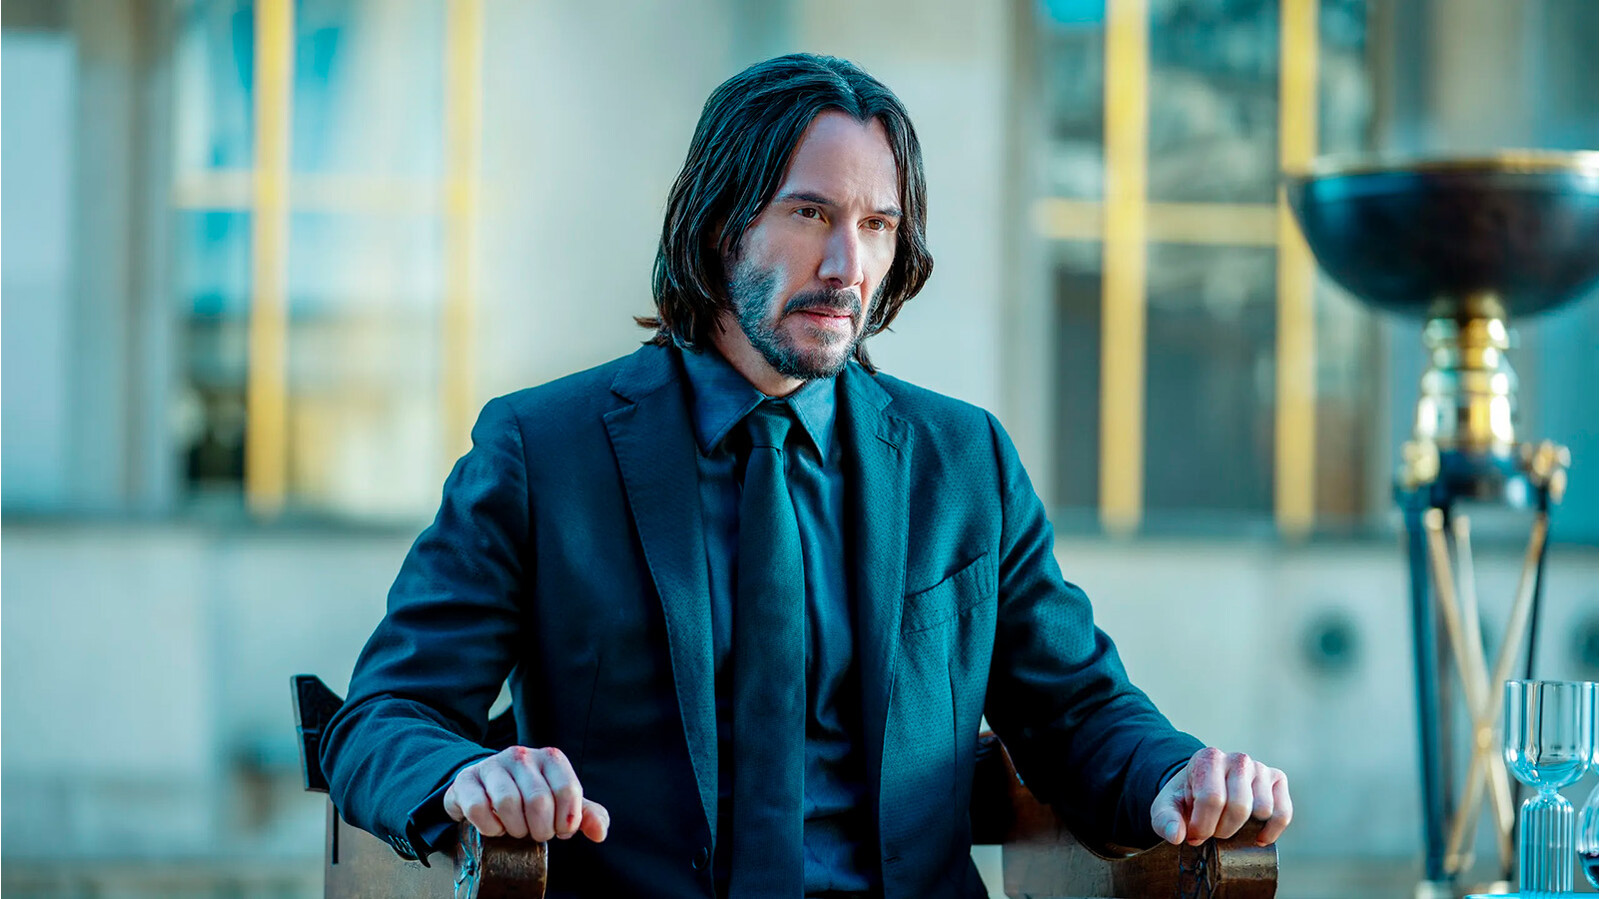 Can We Please Let John Wick Rest In Peace?